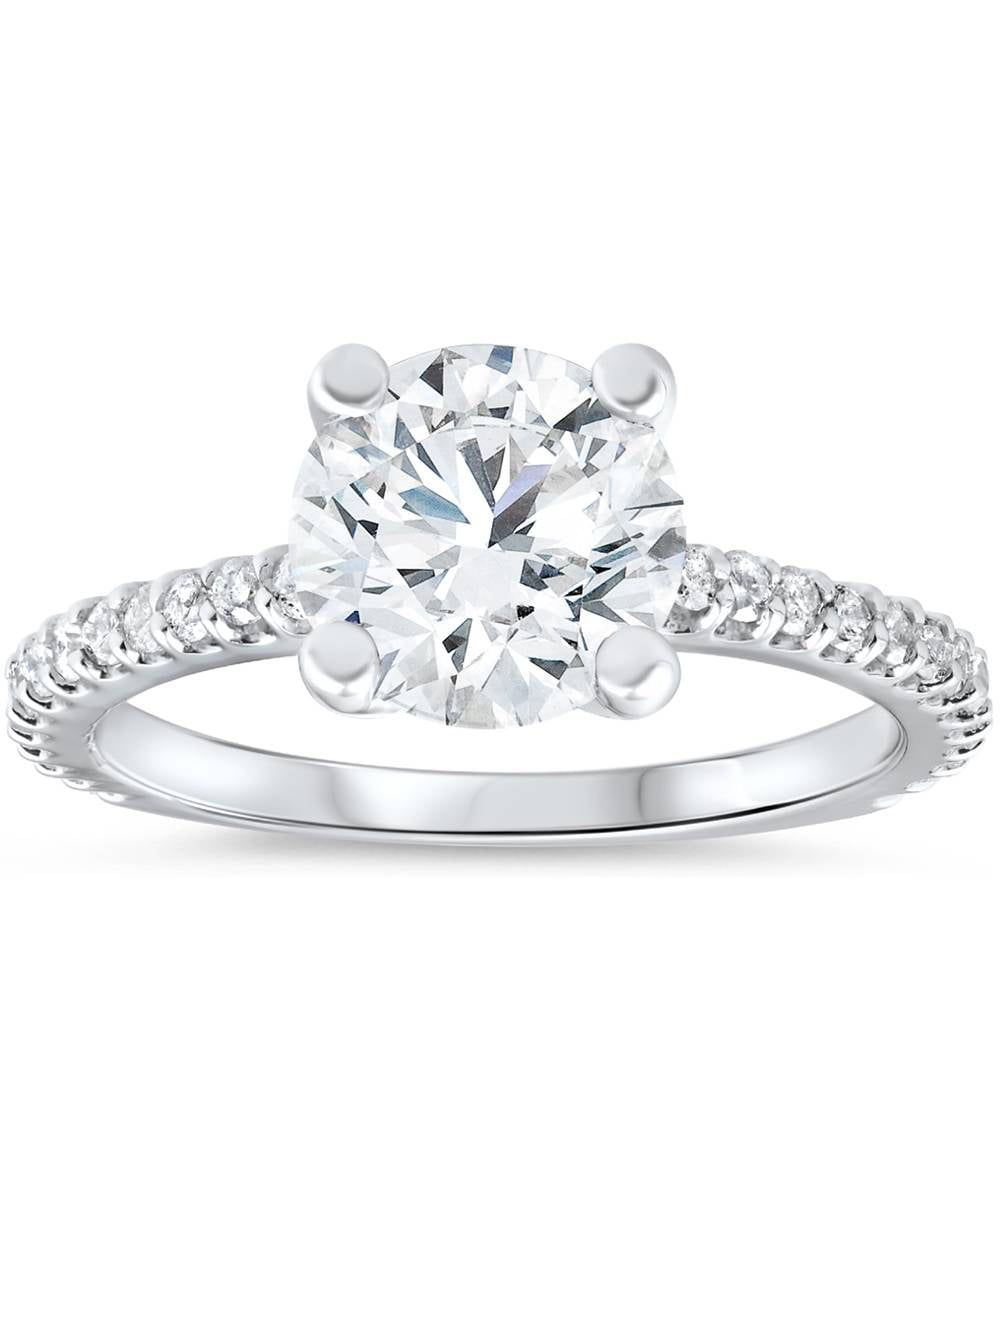 2.50 Ct Round Solitaire Diamond Engagement Wedding Ring 14k White Gold Over 